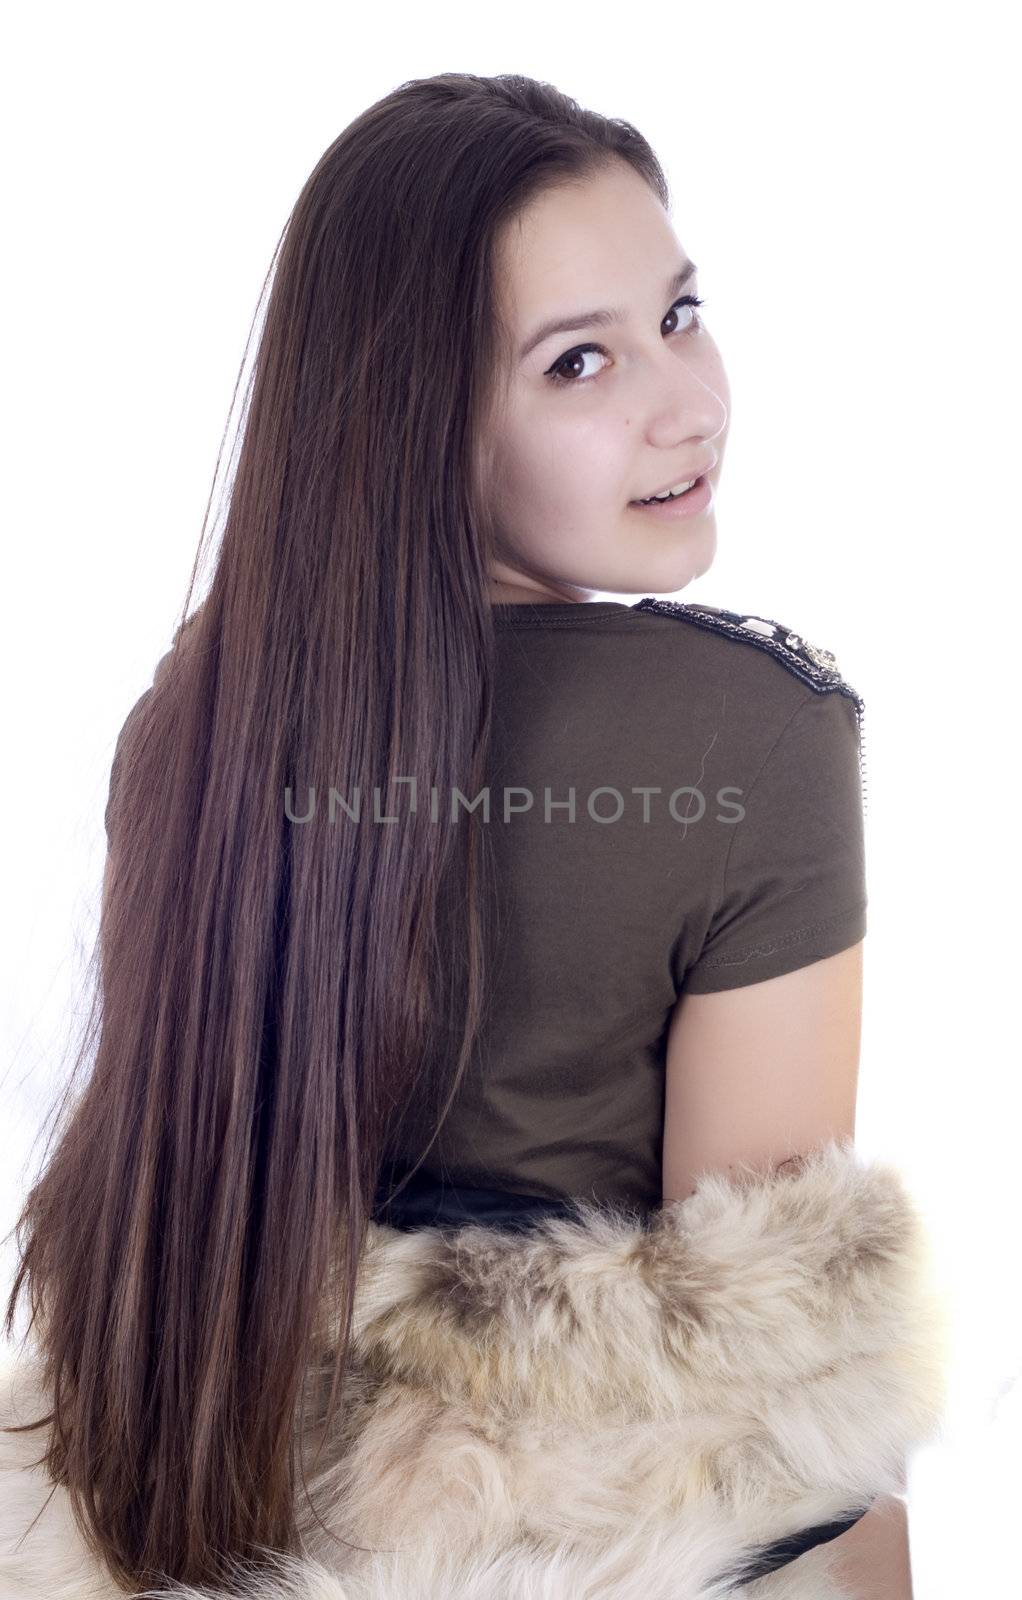 The young beautiful girl in a fur coat  by Irina1977